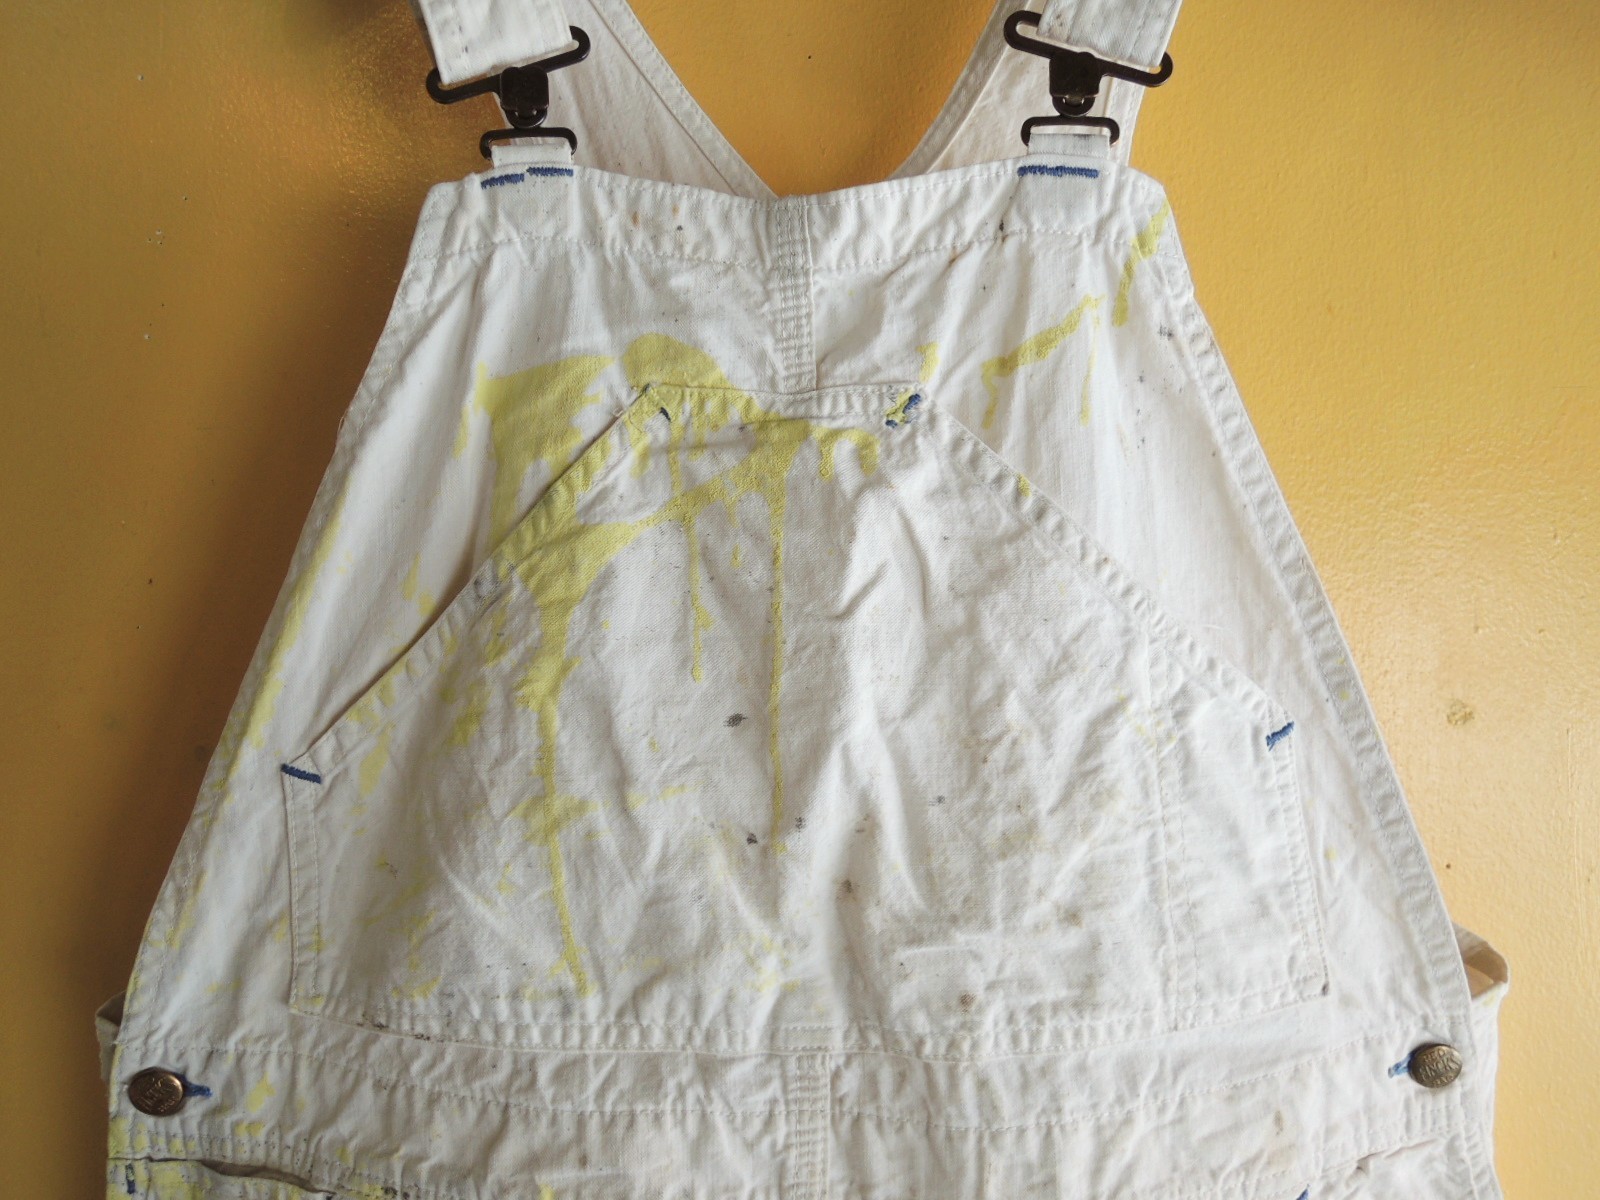 1940～50's FINCK'S overalls: container